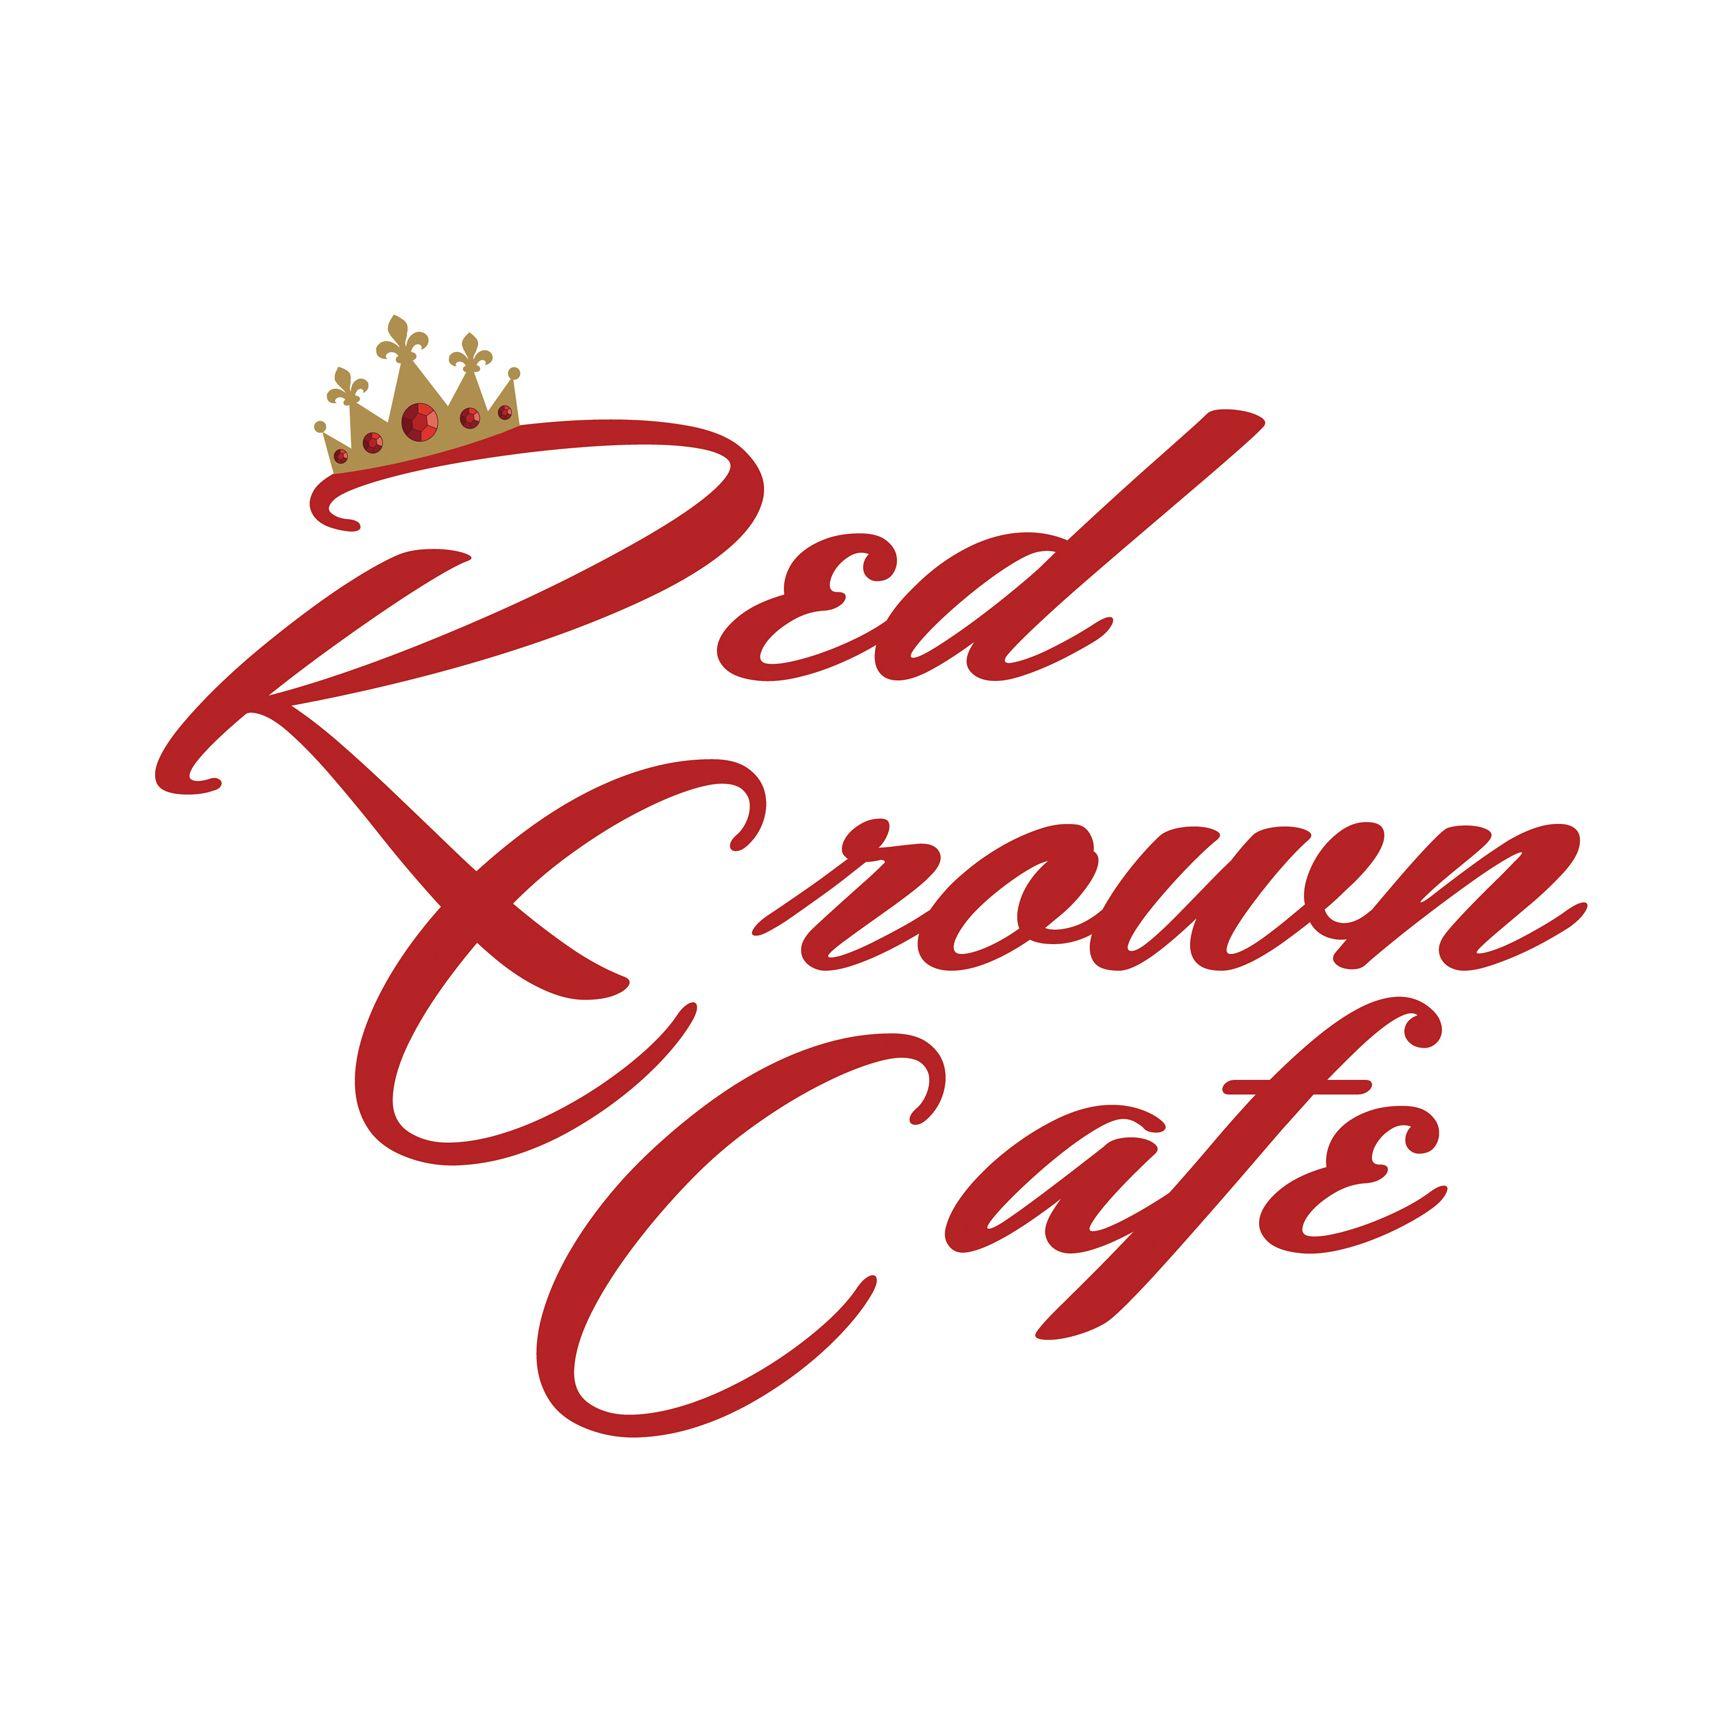 The Square Red Crown Logo - Red Crown Cafe